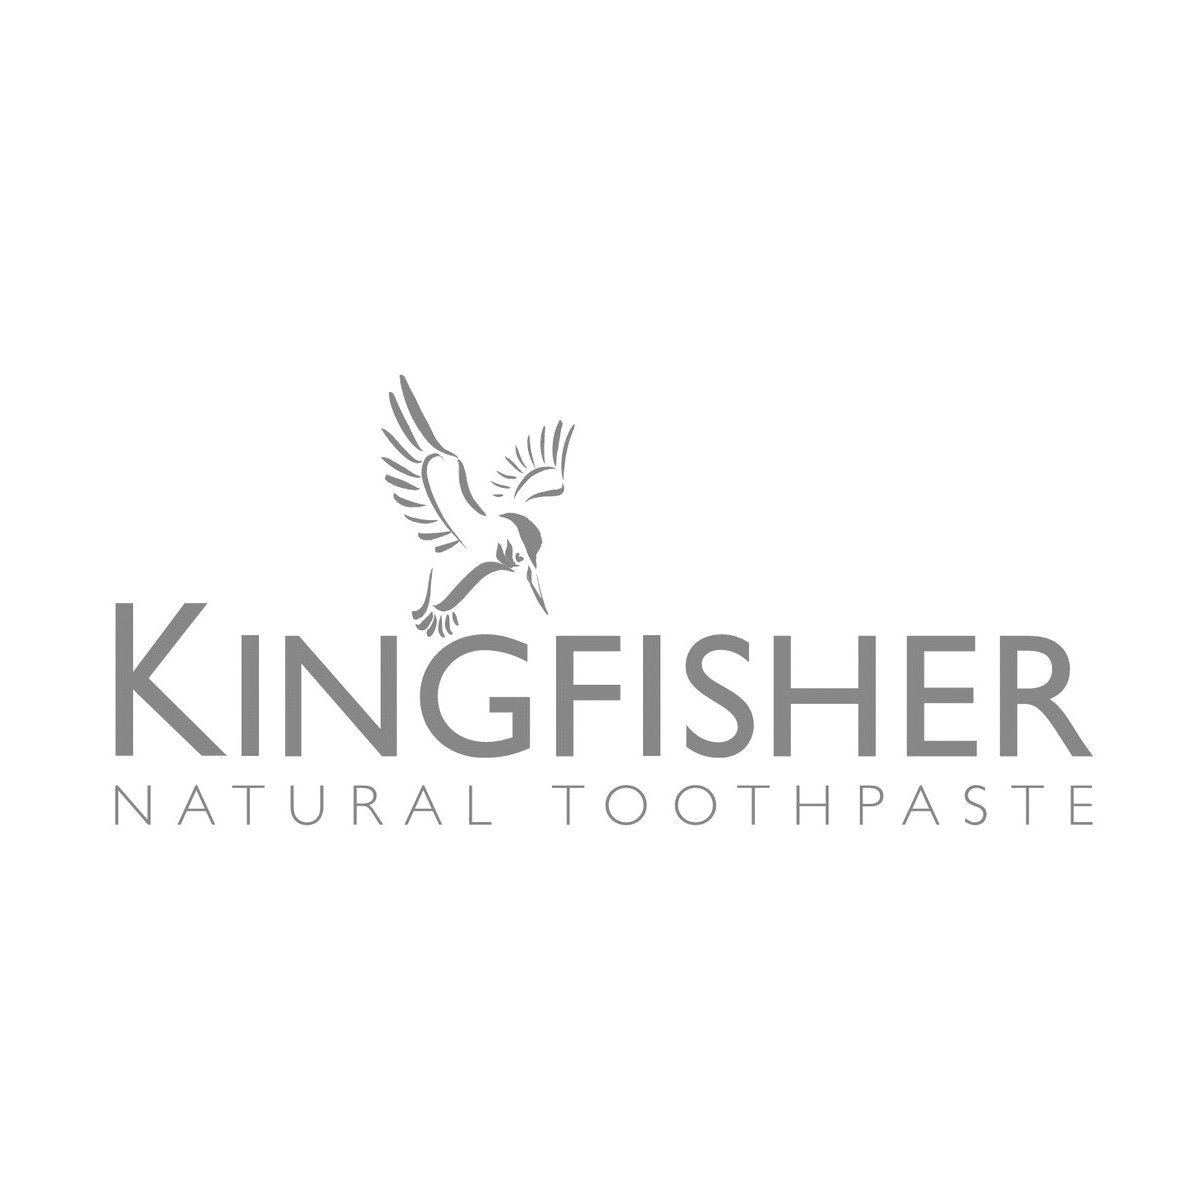 Where-to-Buy-Kingfisher-Natural-Toothpaste